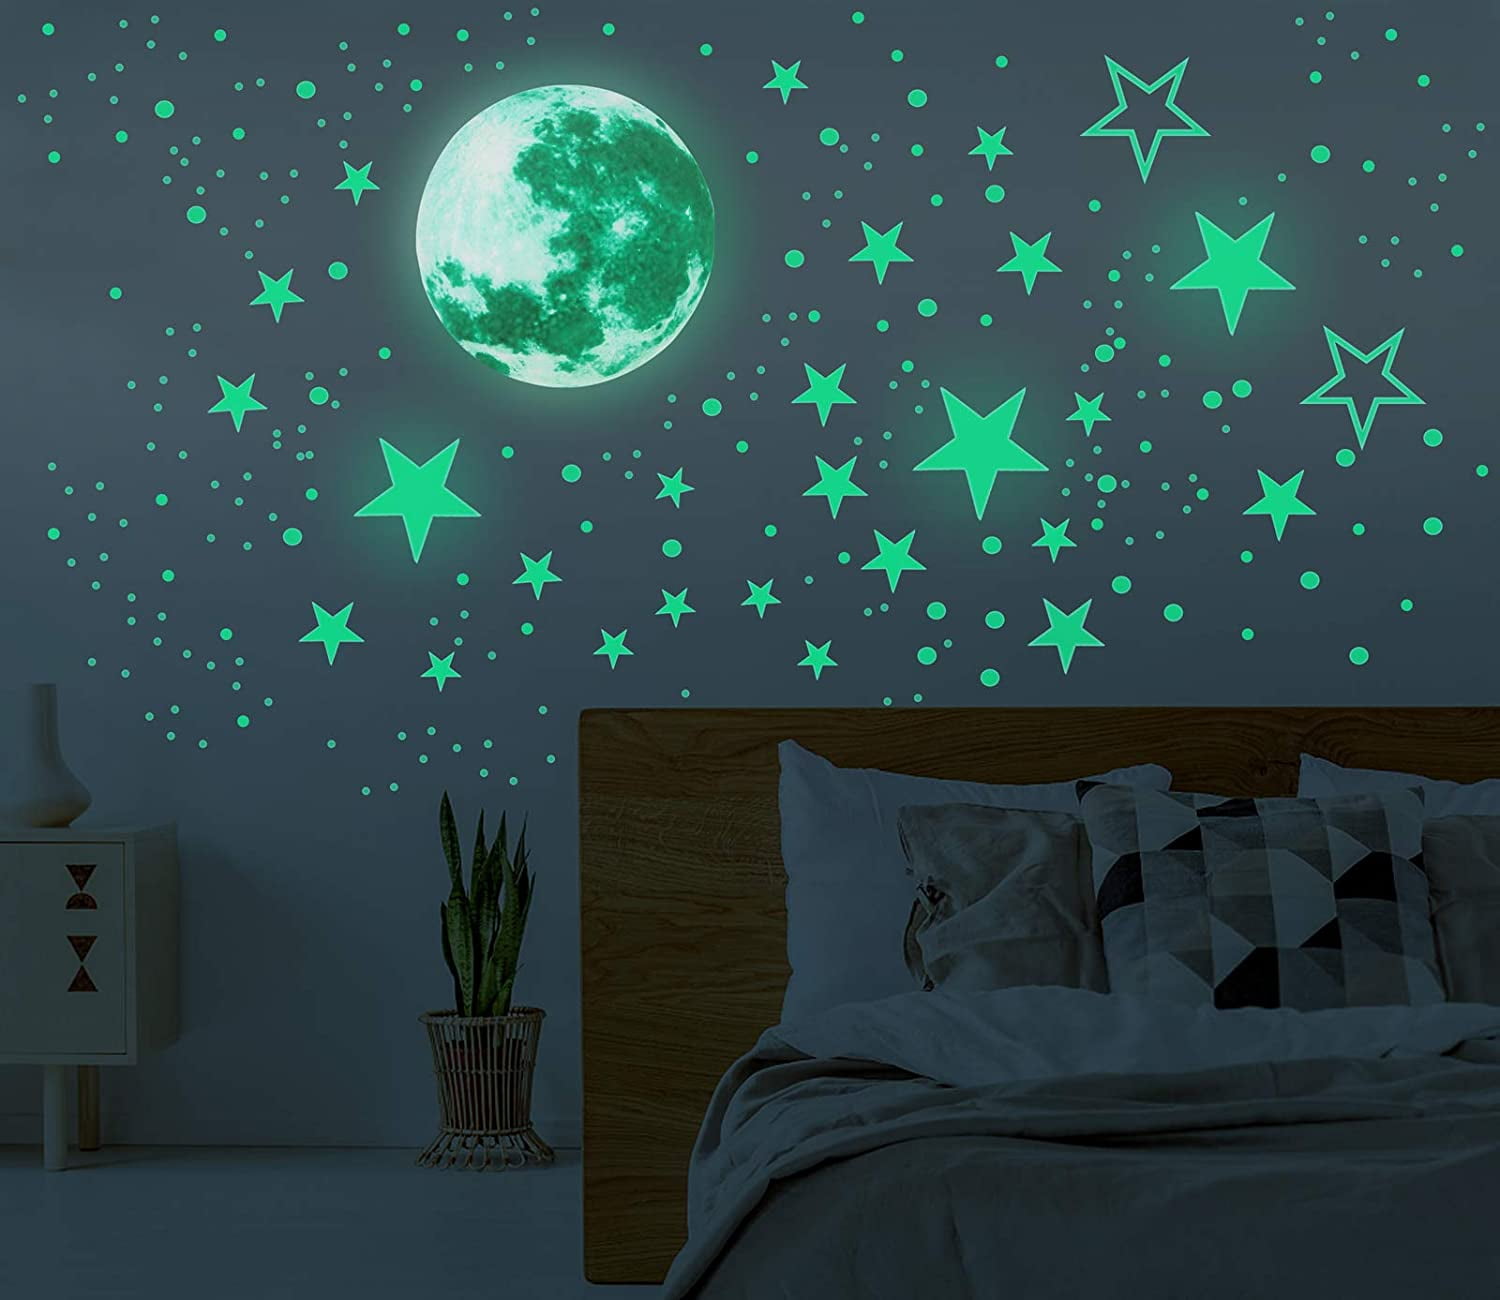 Ceiling Decals Wall Poster Art Decals Detachable Durable Moon Wall Stickers 6T 